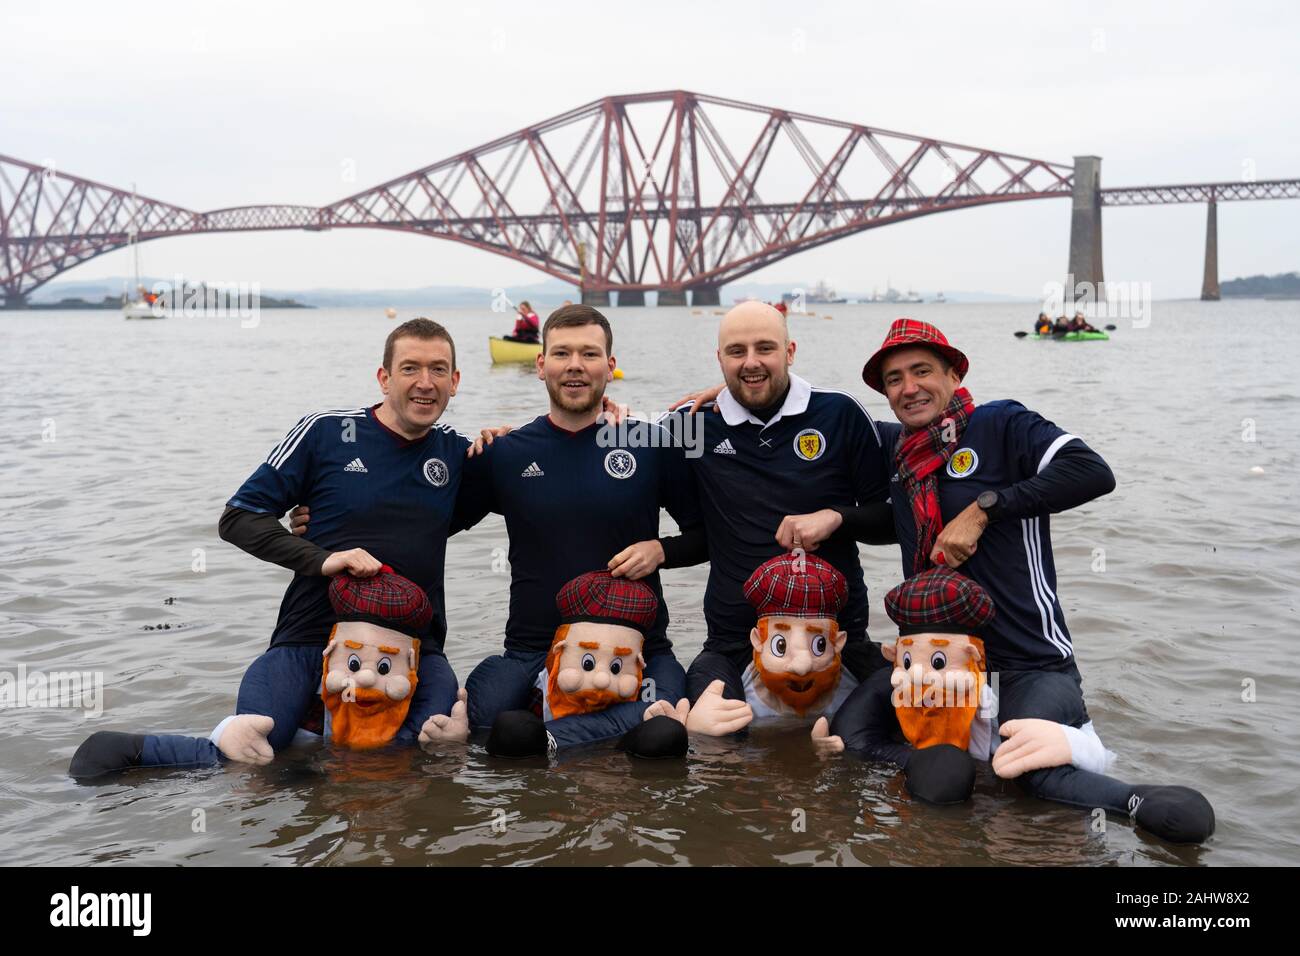 South Queensferry, Scotland, UK. 1st Jan 2020. People in fancy dress take the plunge into the Firth of Forth river during the annual New Year’s Day Loony Dook at South Queensferry. Iain Masterton/Alamy Live News Stock Photo